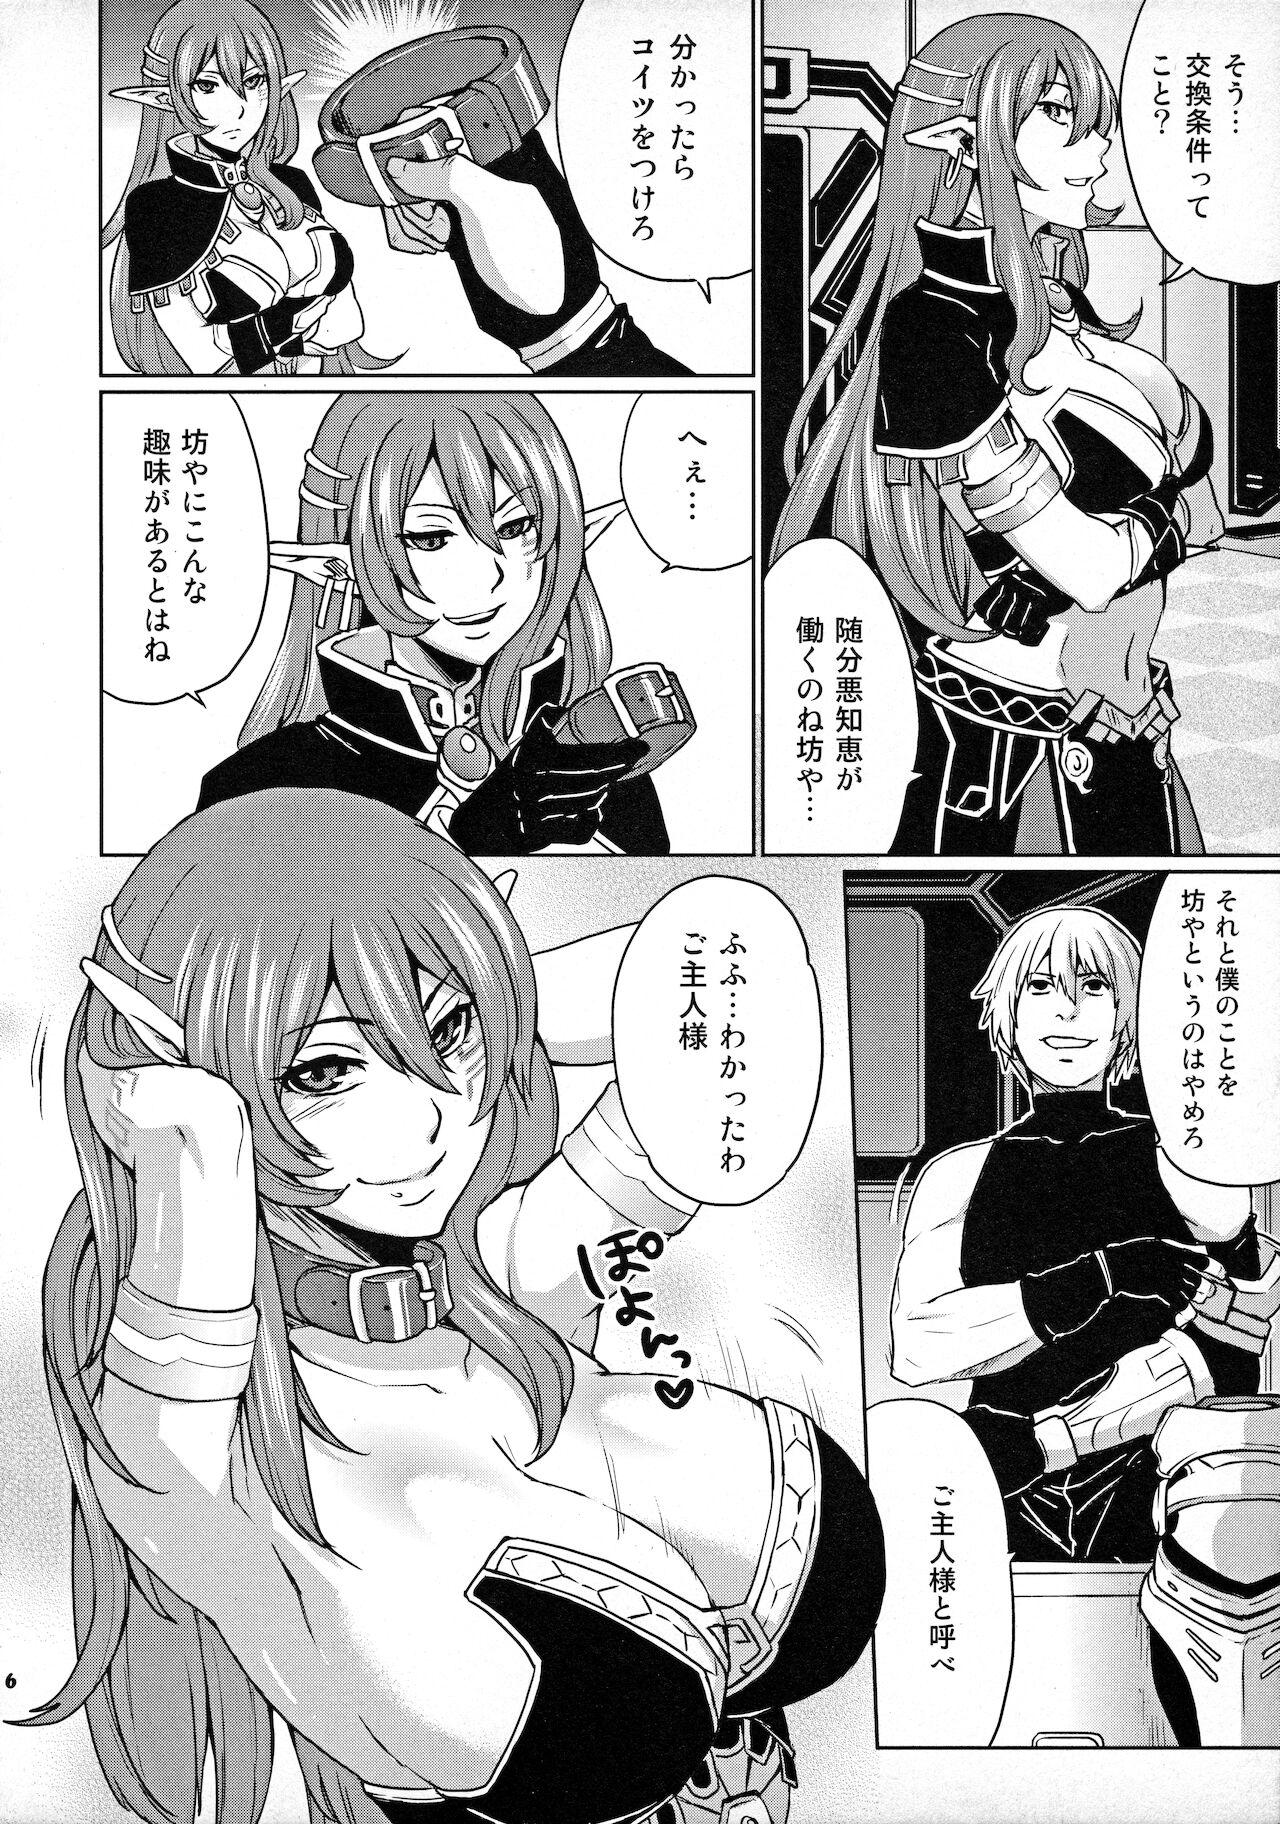 Babes Hoshi no Umi no Miboujin - The Widow of The Star Ocean - Star ocean 4 Blondes - Page 5